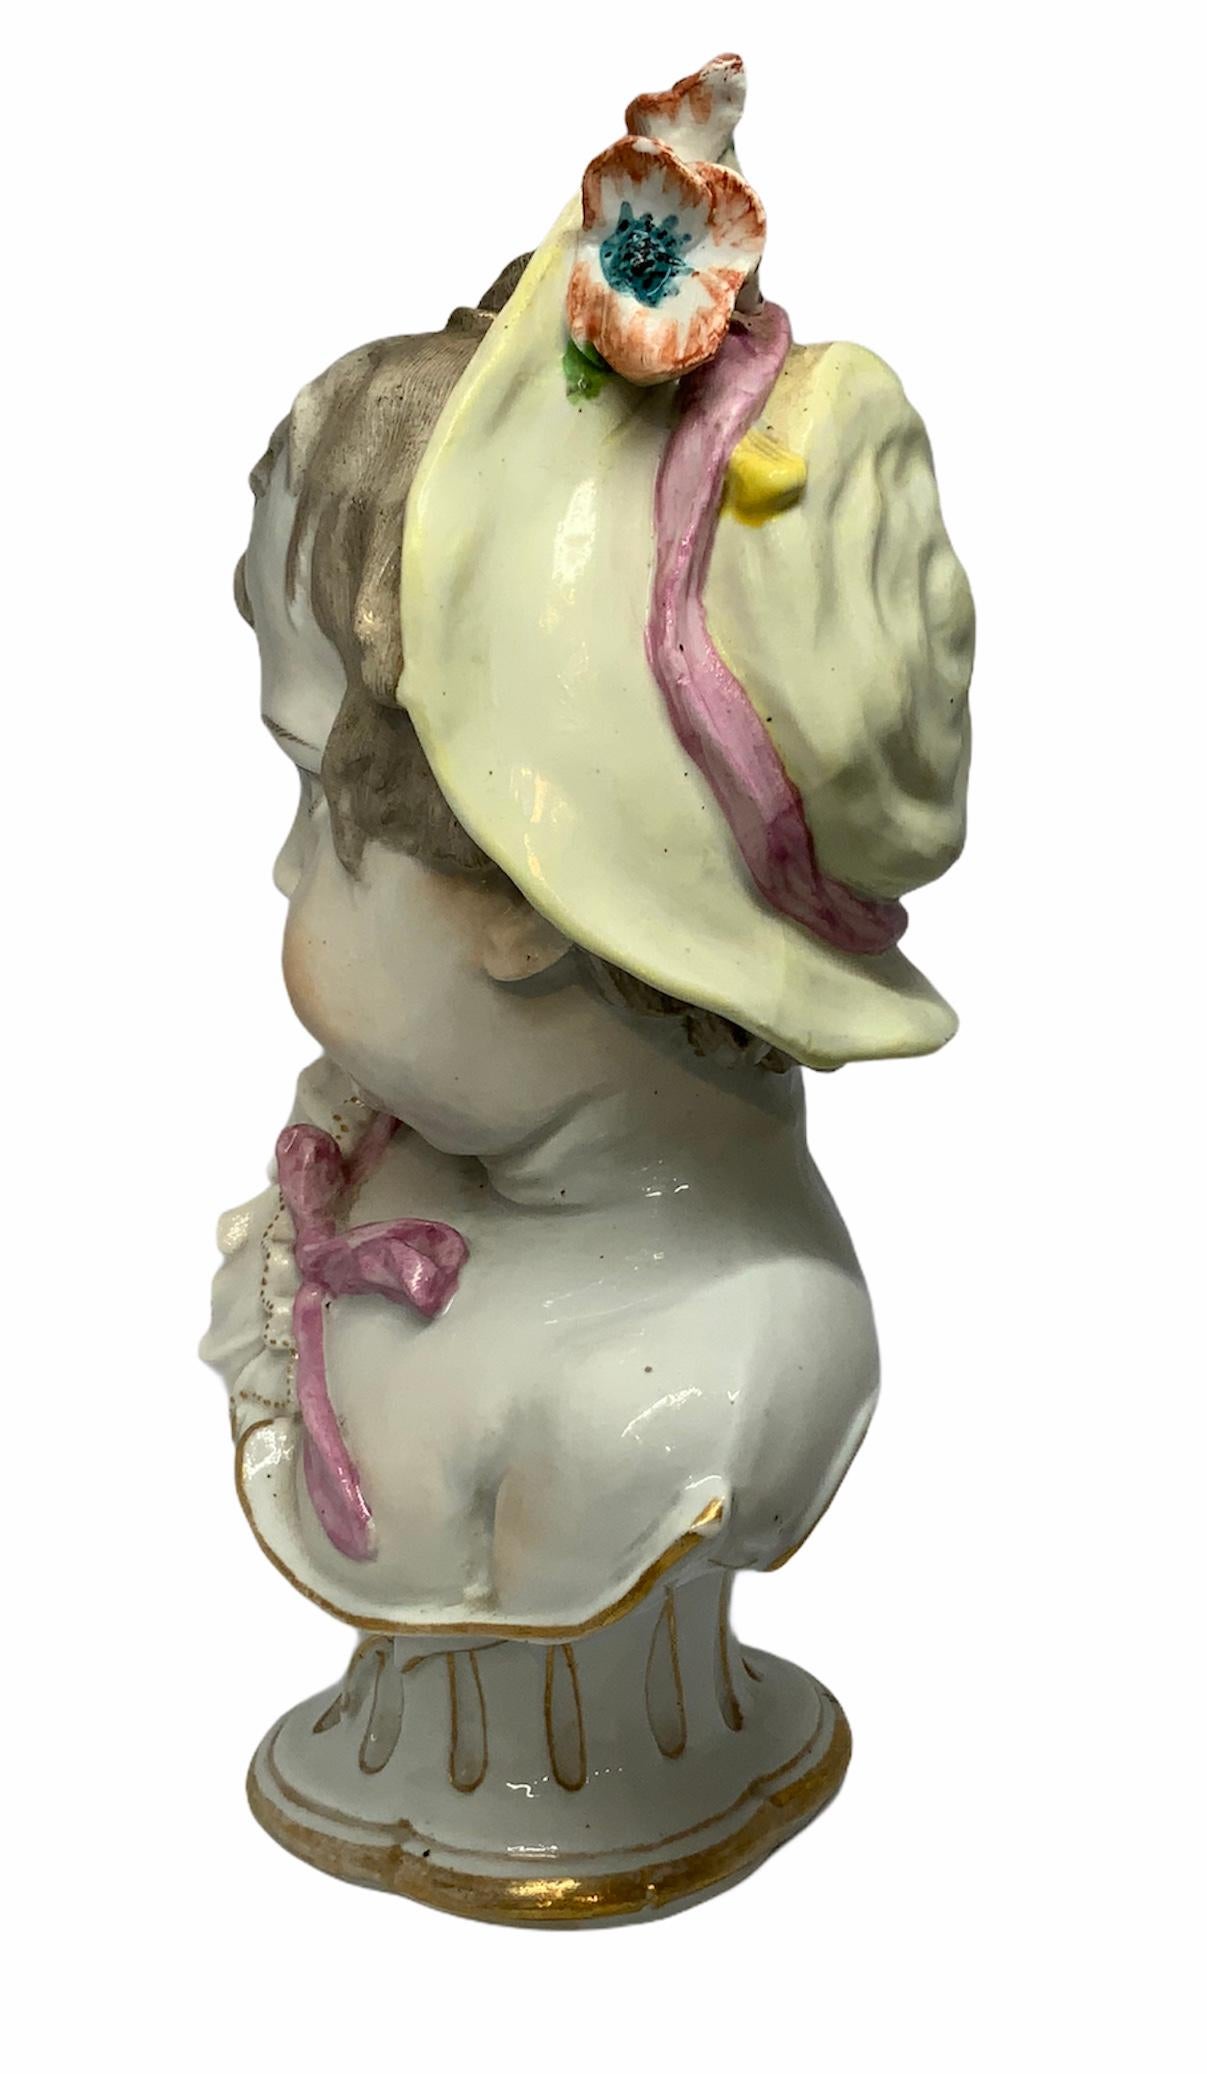 Depicting a bust of a baby girl with an innocent gaze, red lips, and uncombed blond hair. She is wearing a gilt white ruffle top and in her head a charming pink bow hat with flowers. It stands on a gilt and white quatrefoile base. There are two blue